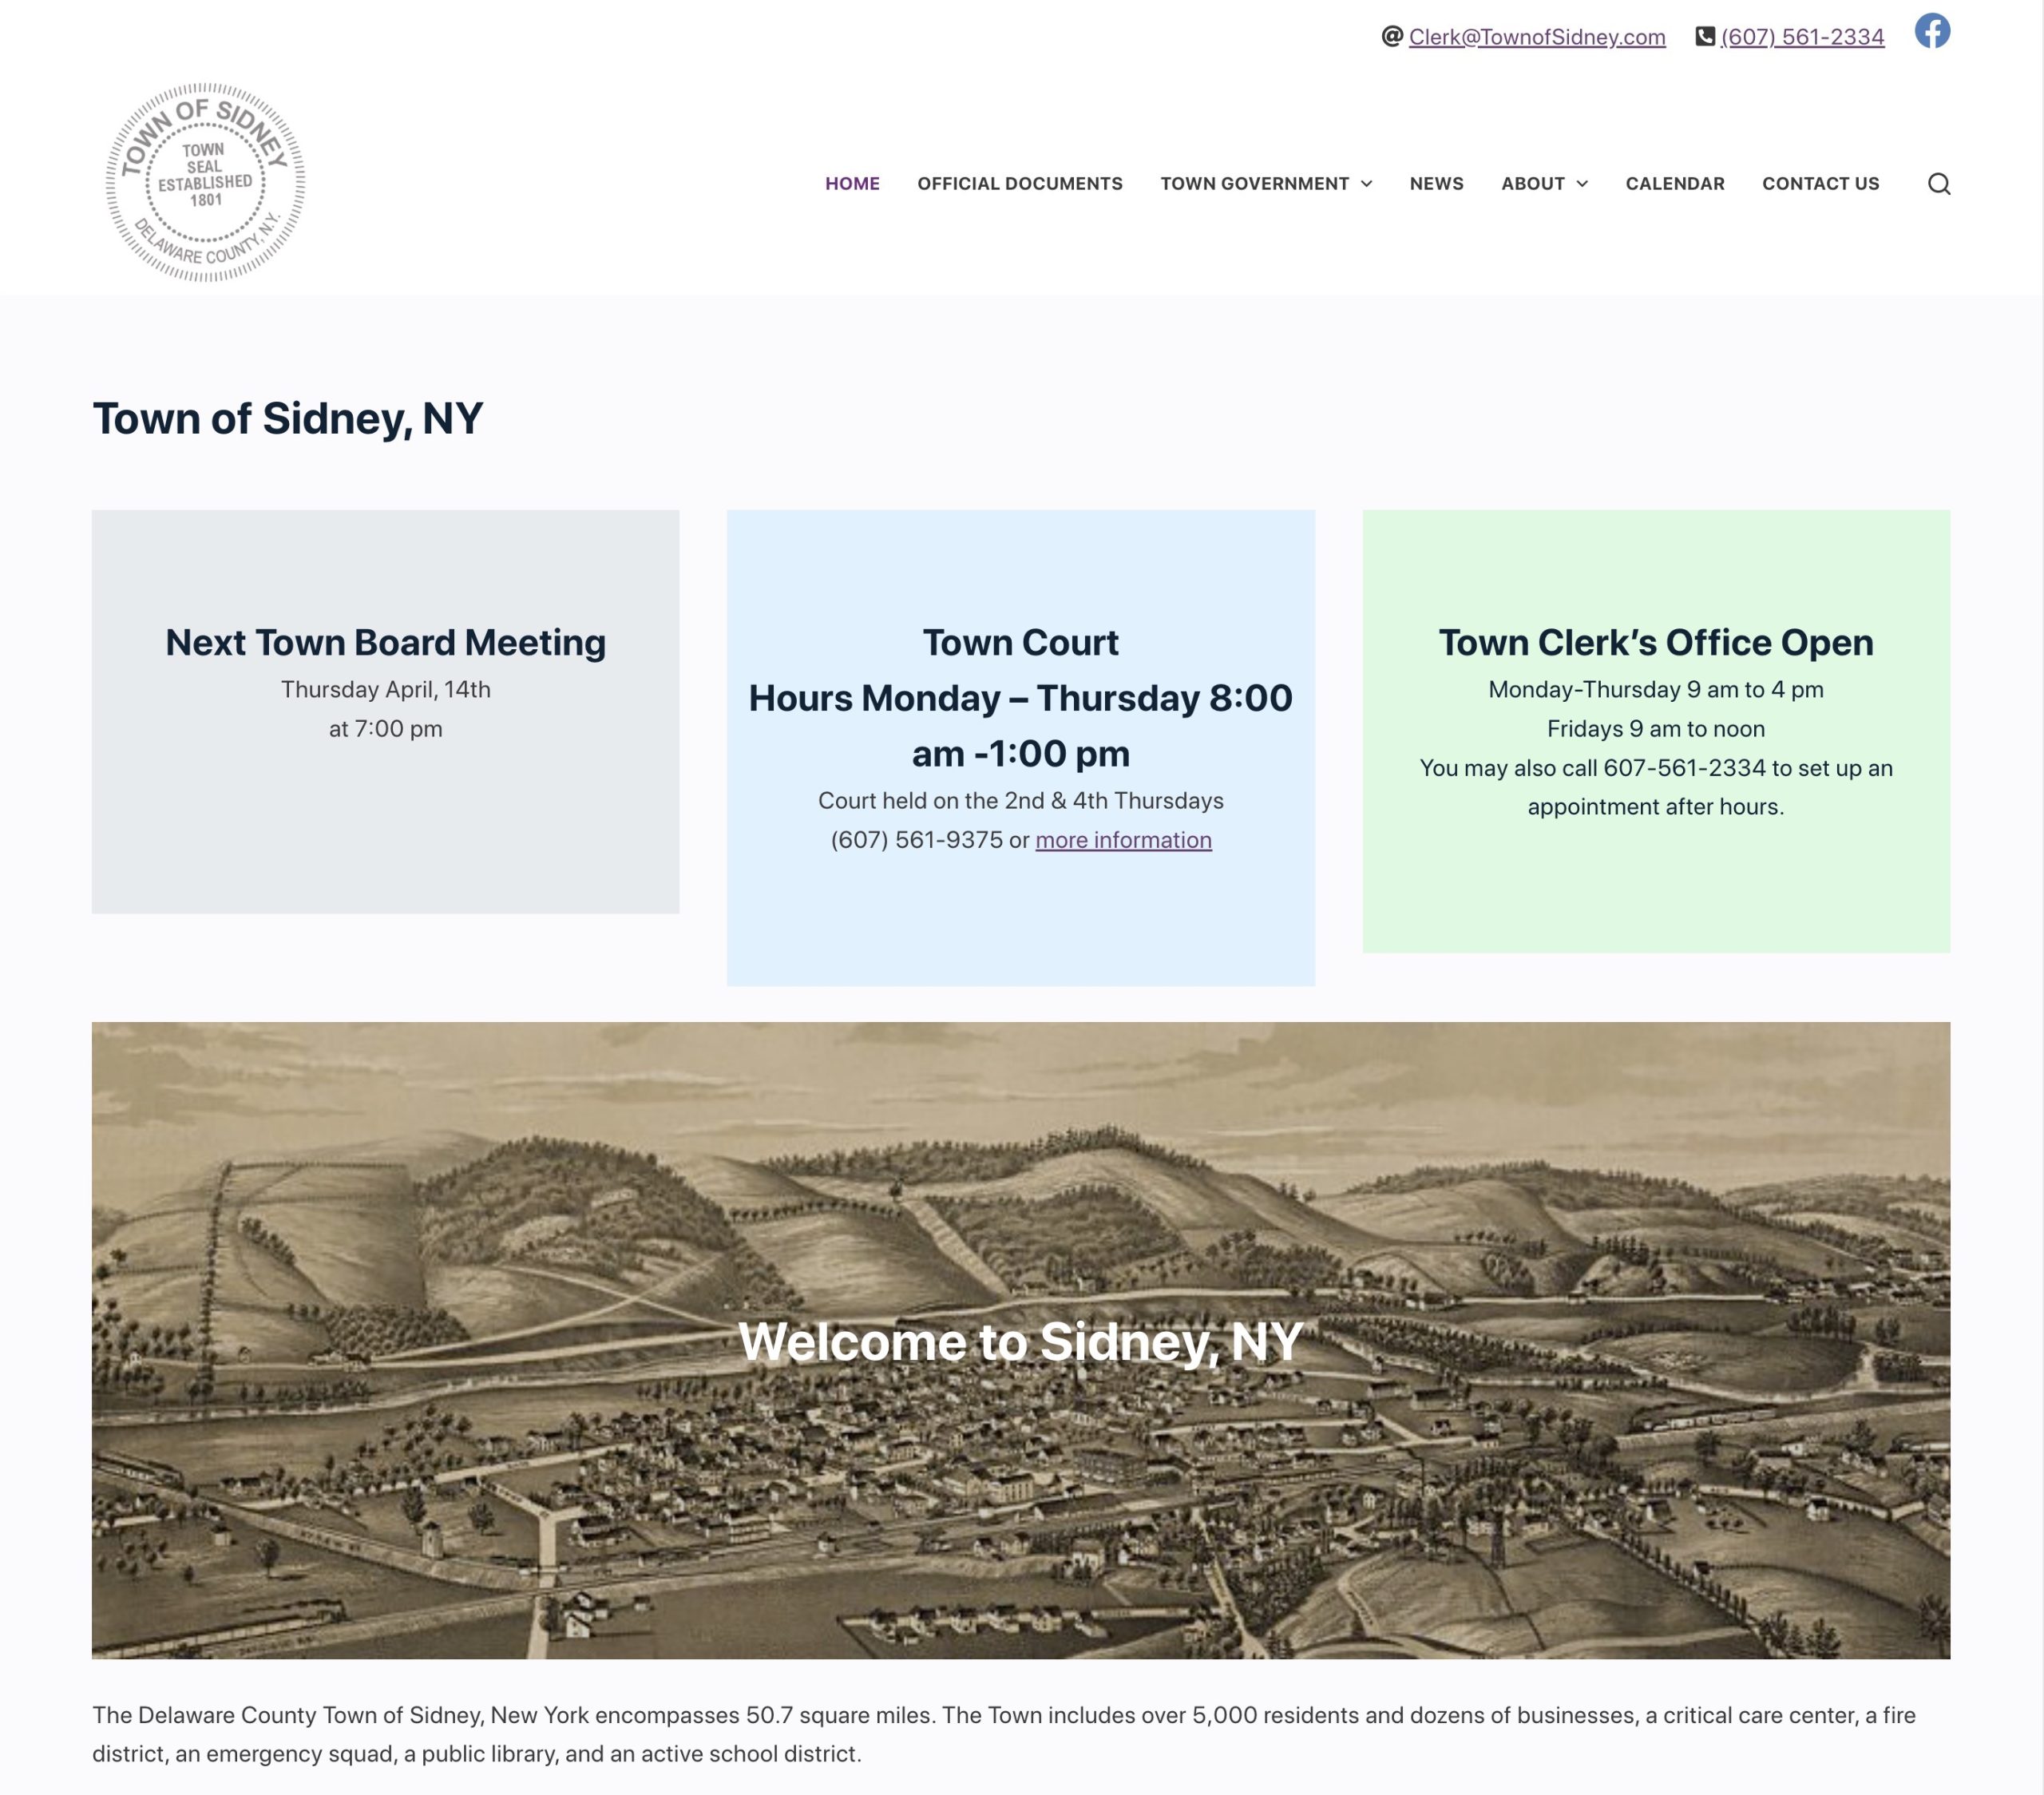 A government website for residents of the Town of Sidney NY.
Visit website townofsidney.com